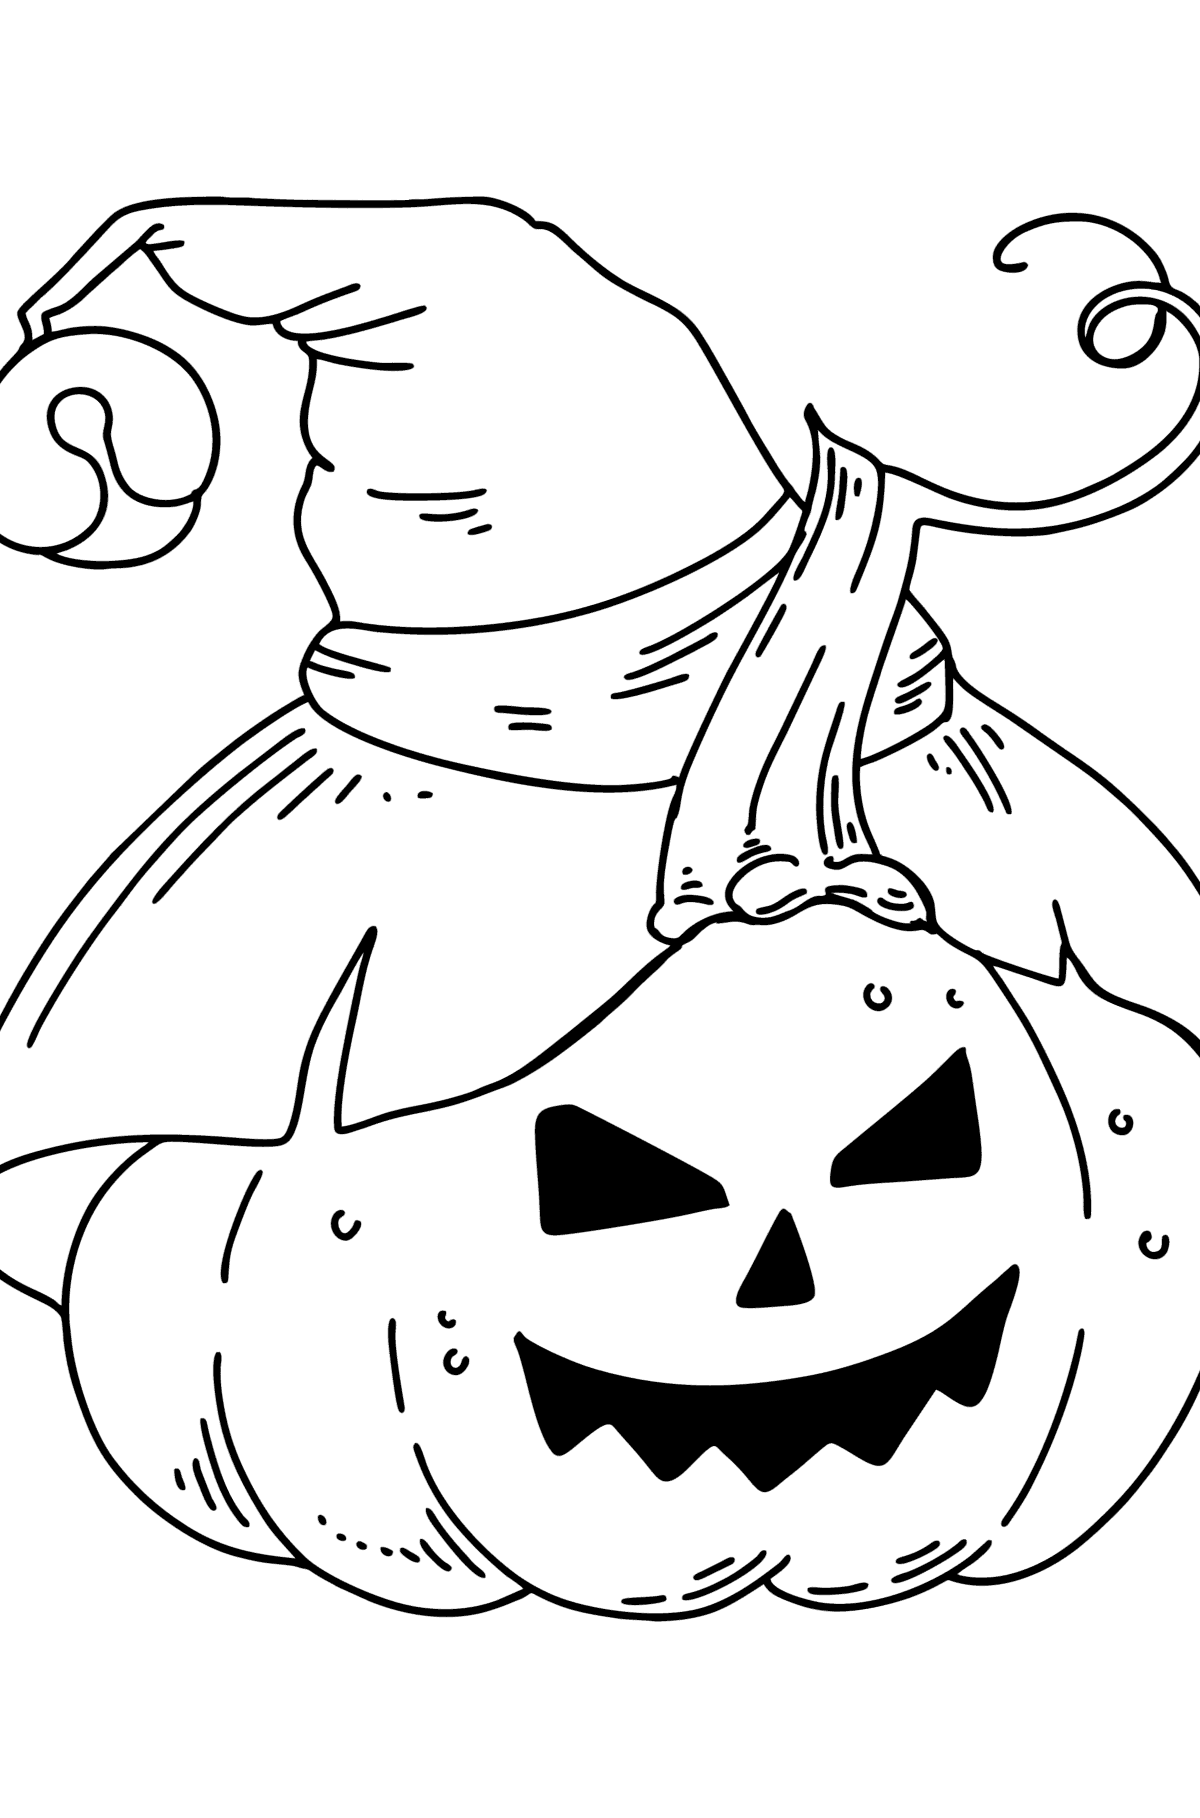 Coloring page - Pumpkin with a hat on Halloween - Coloring Pages for Kids